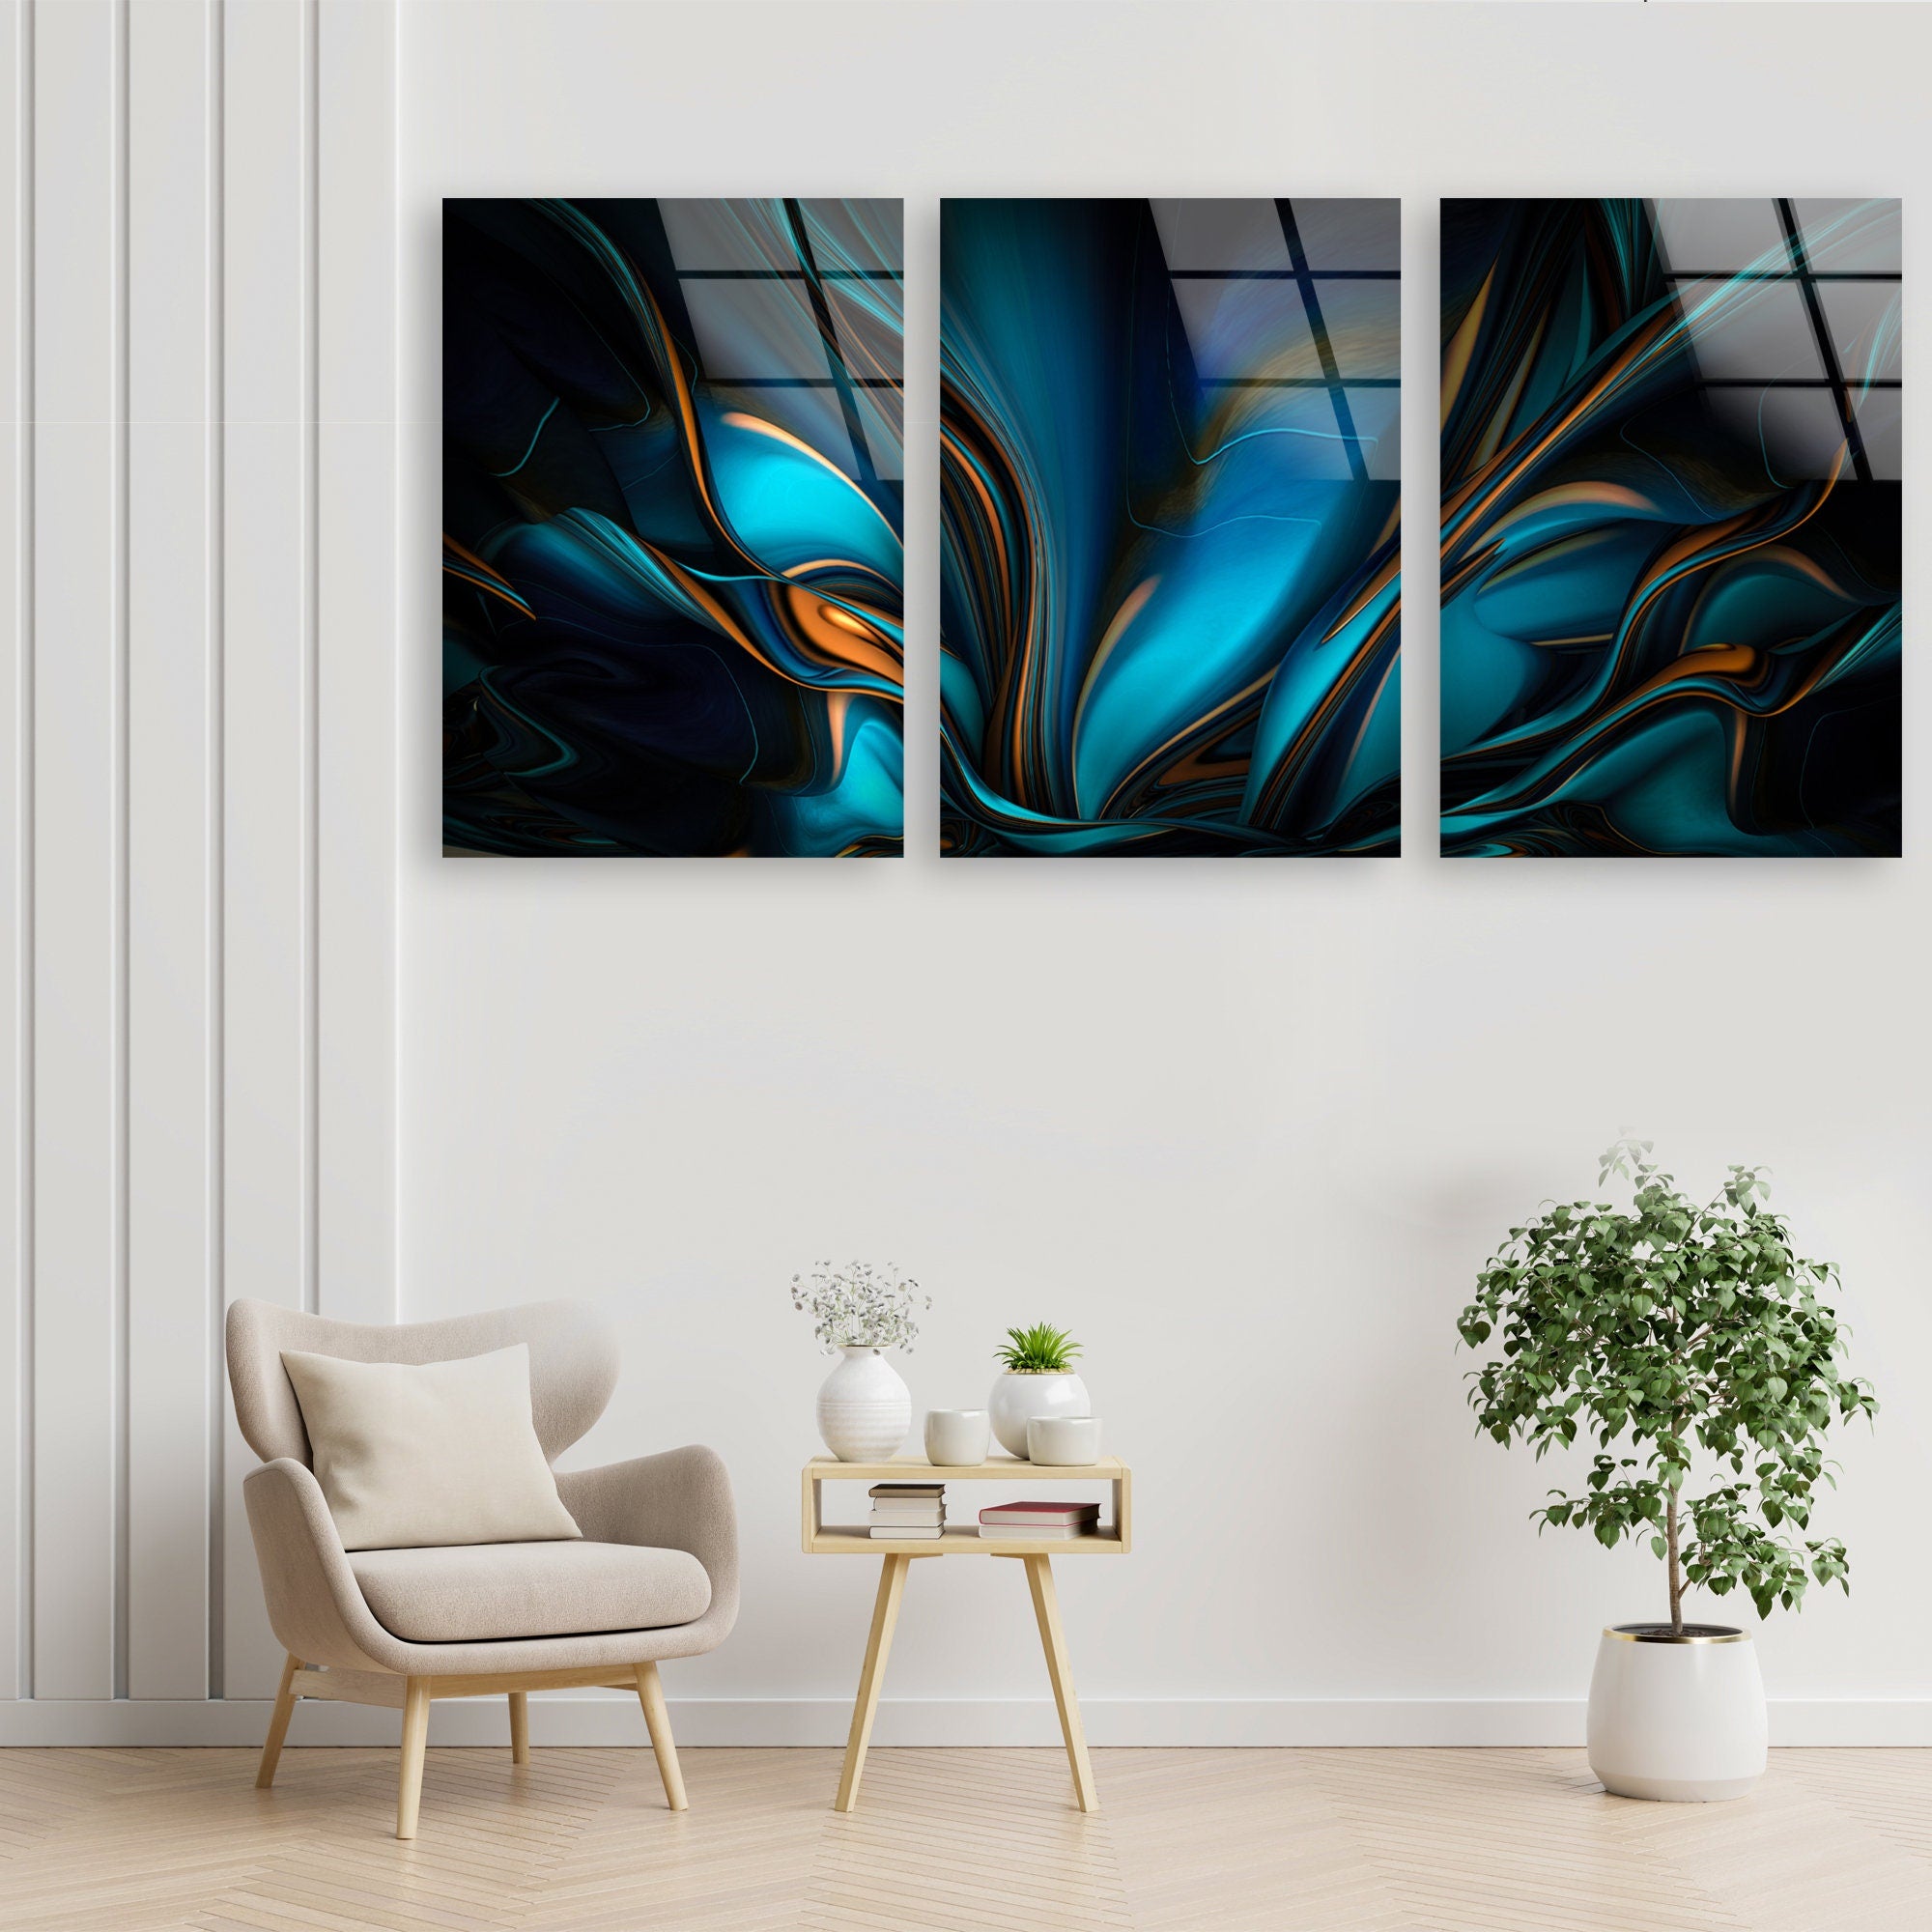 Set of Dark Abstract Tempered Glass Wall Art